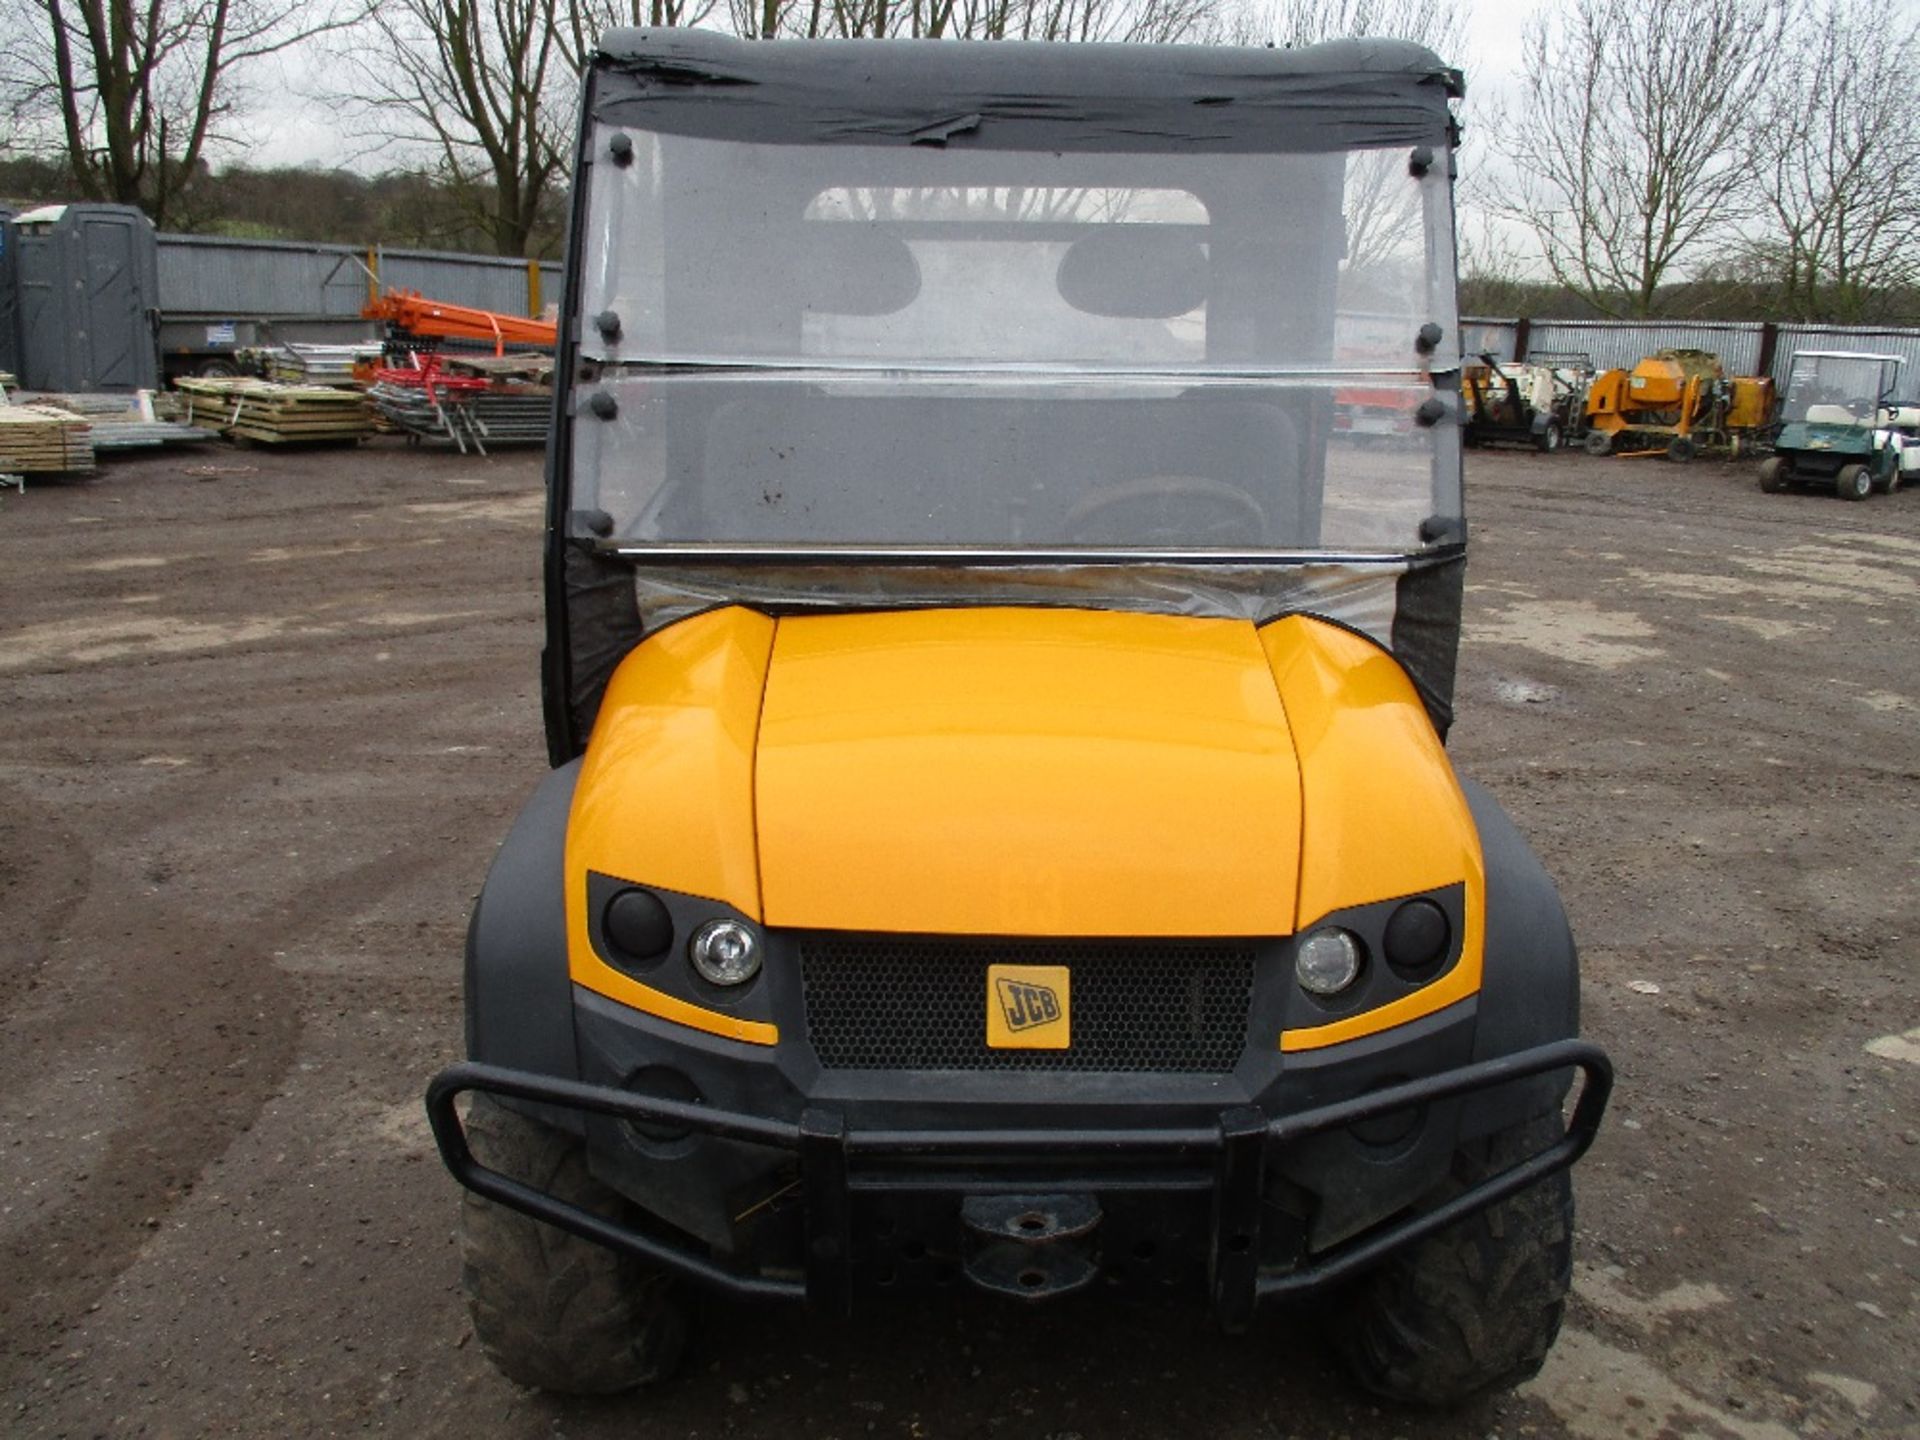 JCB Workmax off road utility vehicle year 2012 build. - Image 2 of 9